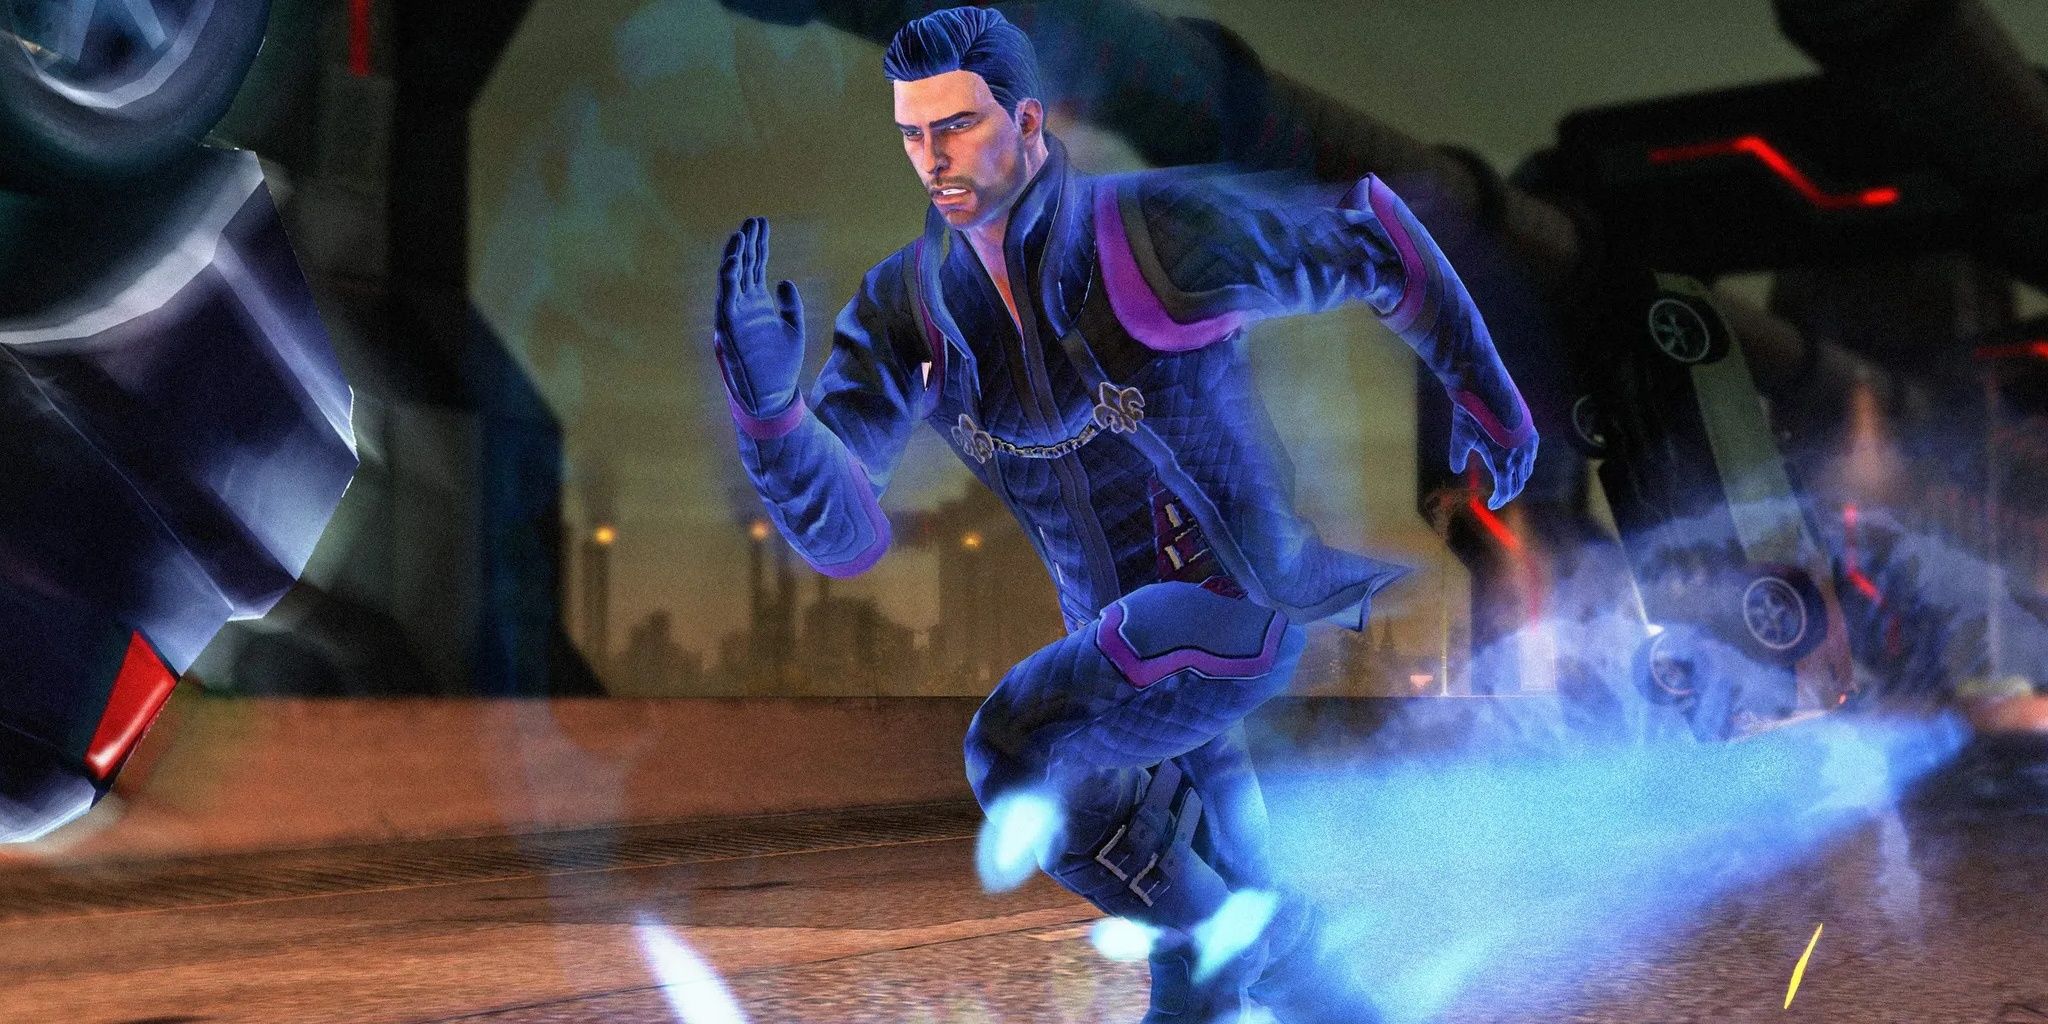 Saints Row 4: Re-Elected is going free on Epic Games' next week